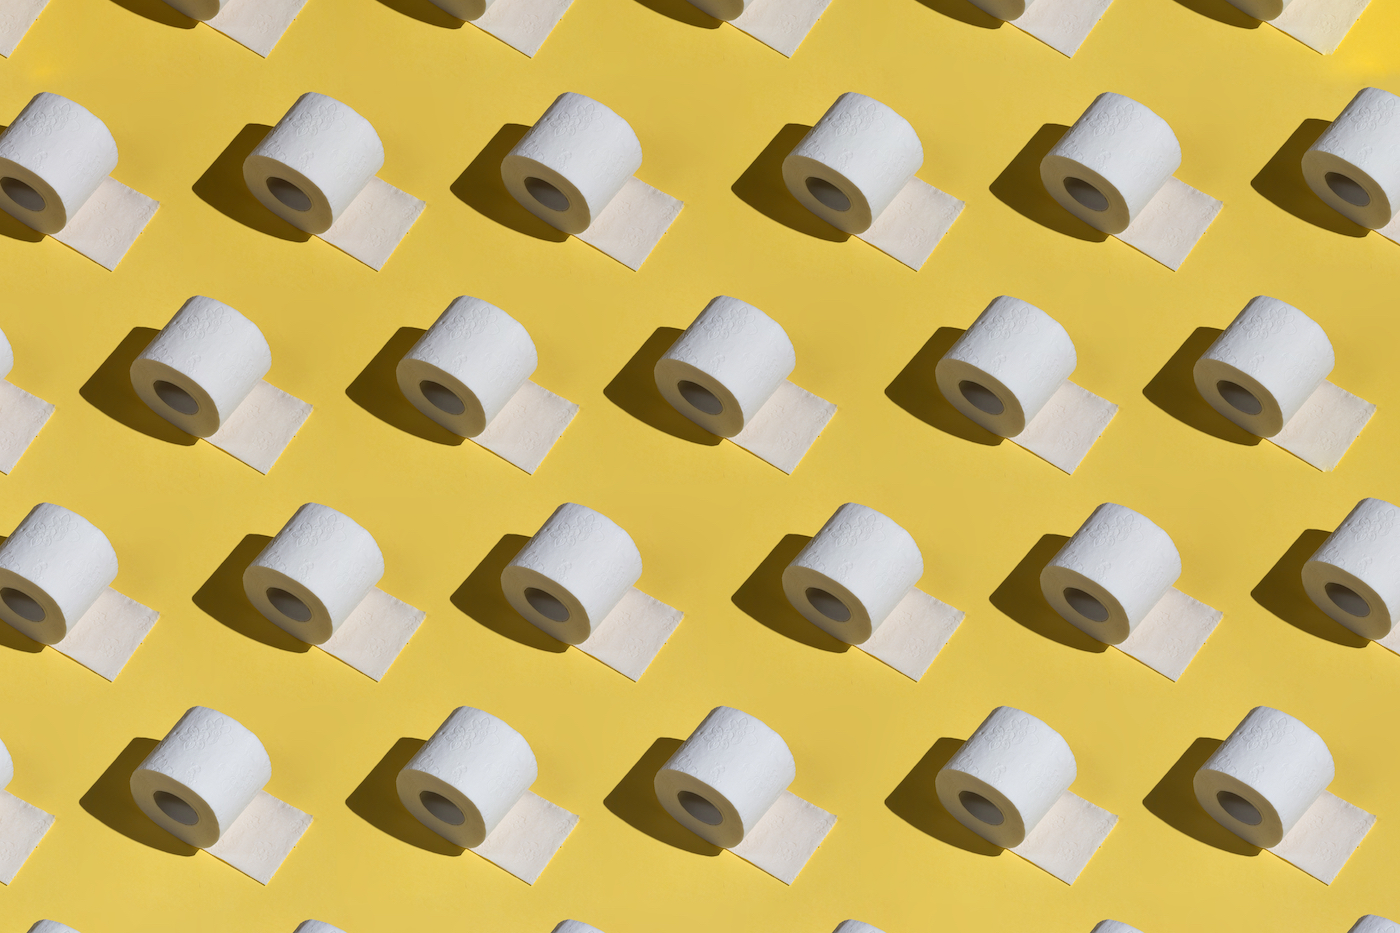 3d pattern of toilet paper isolated on the yellow background.wallpaper for bathroom